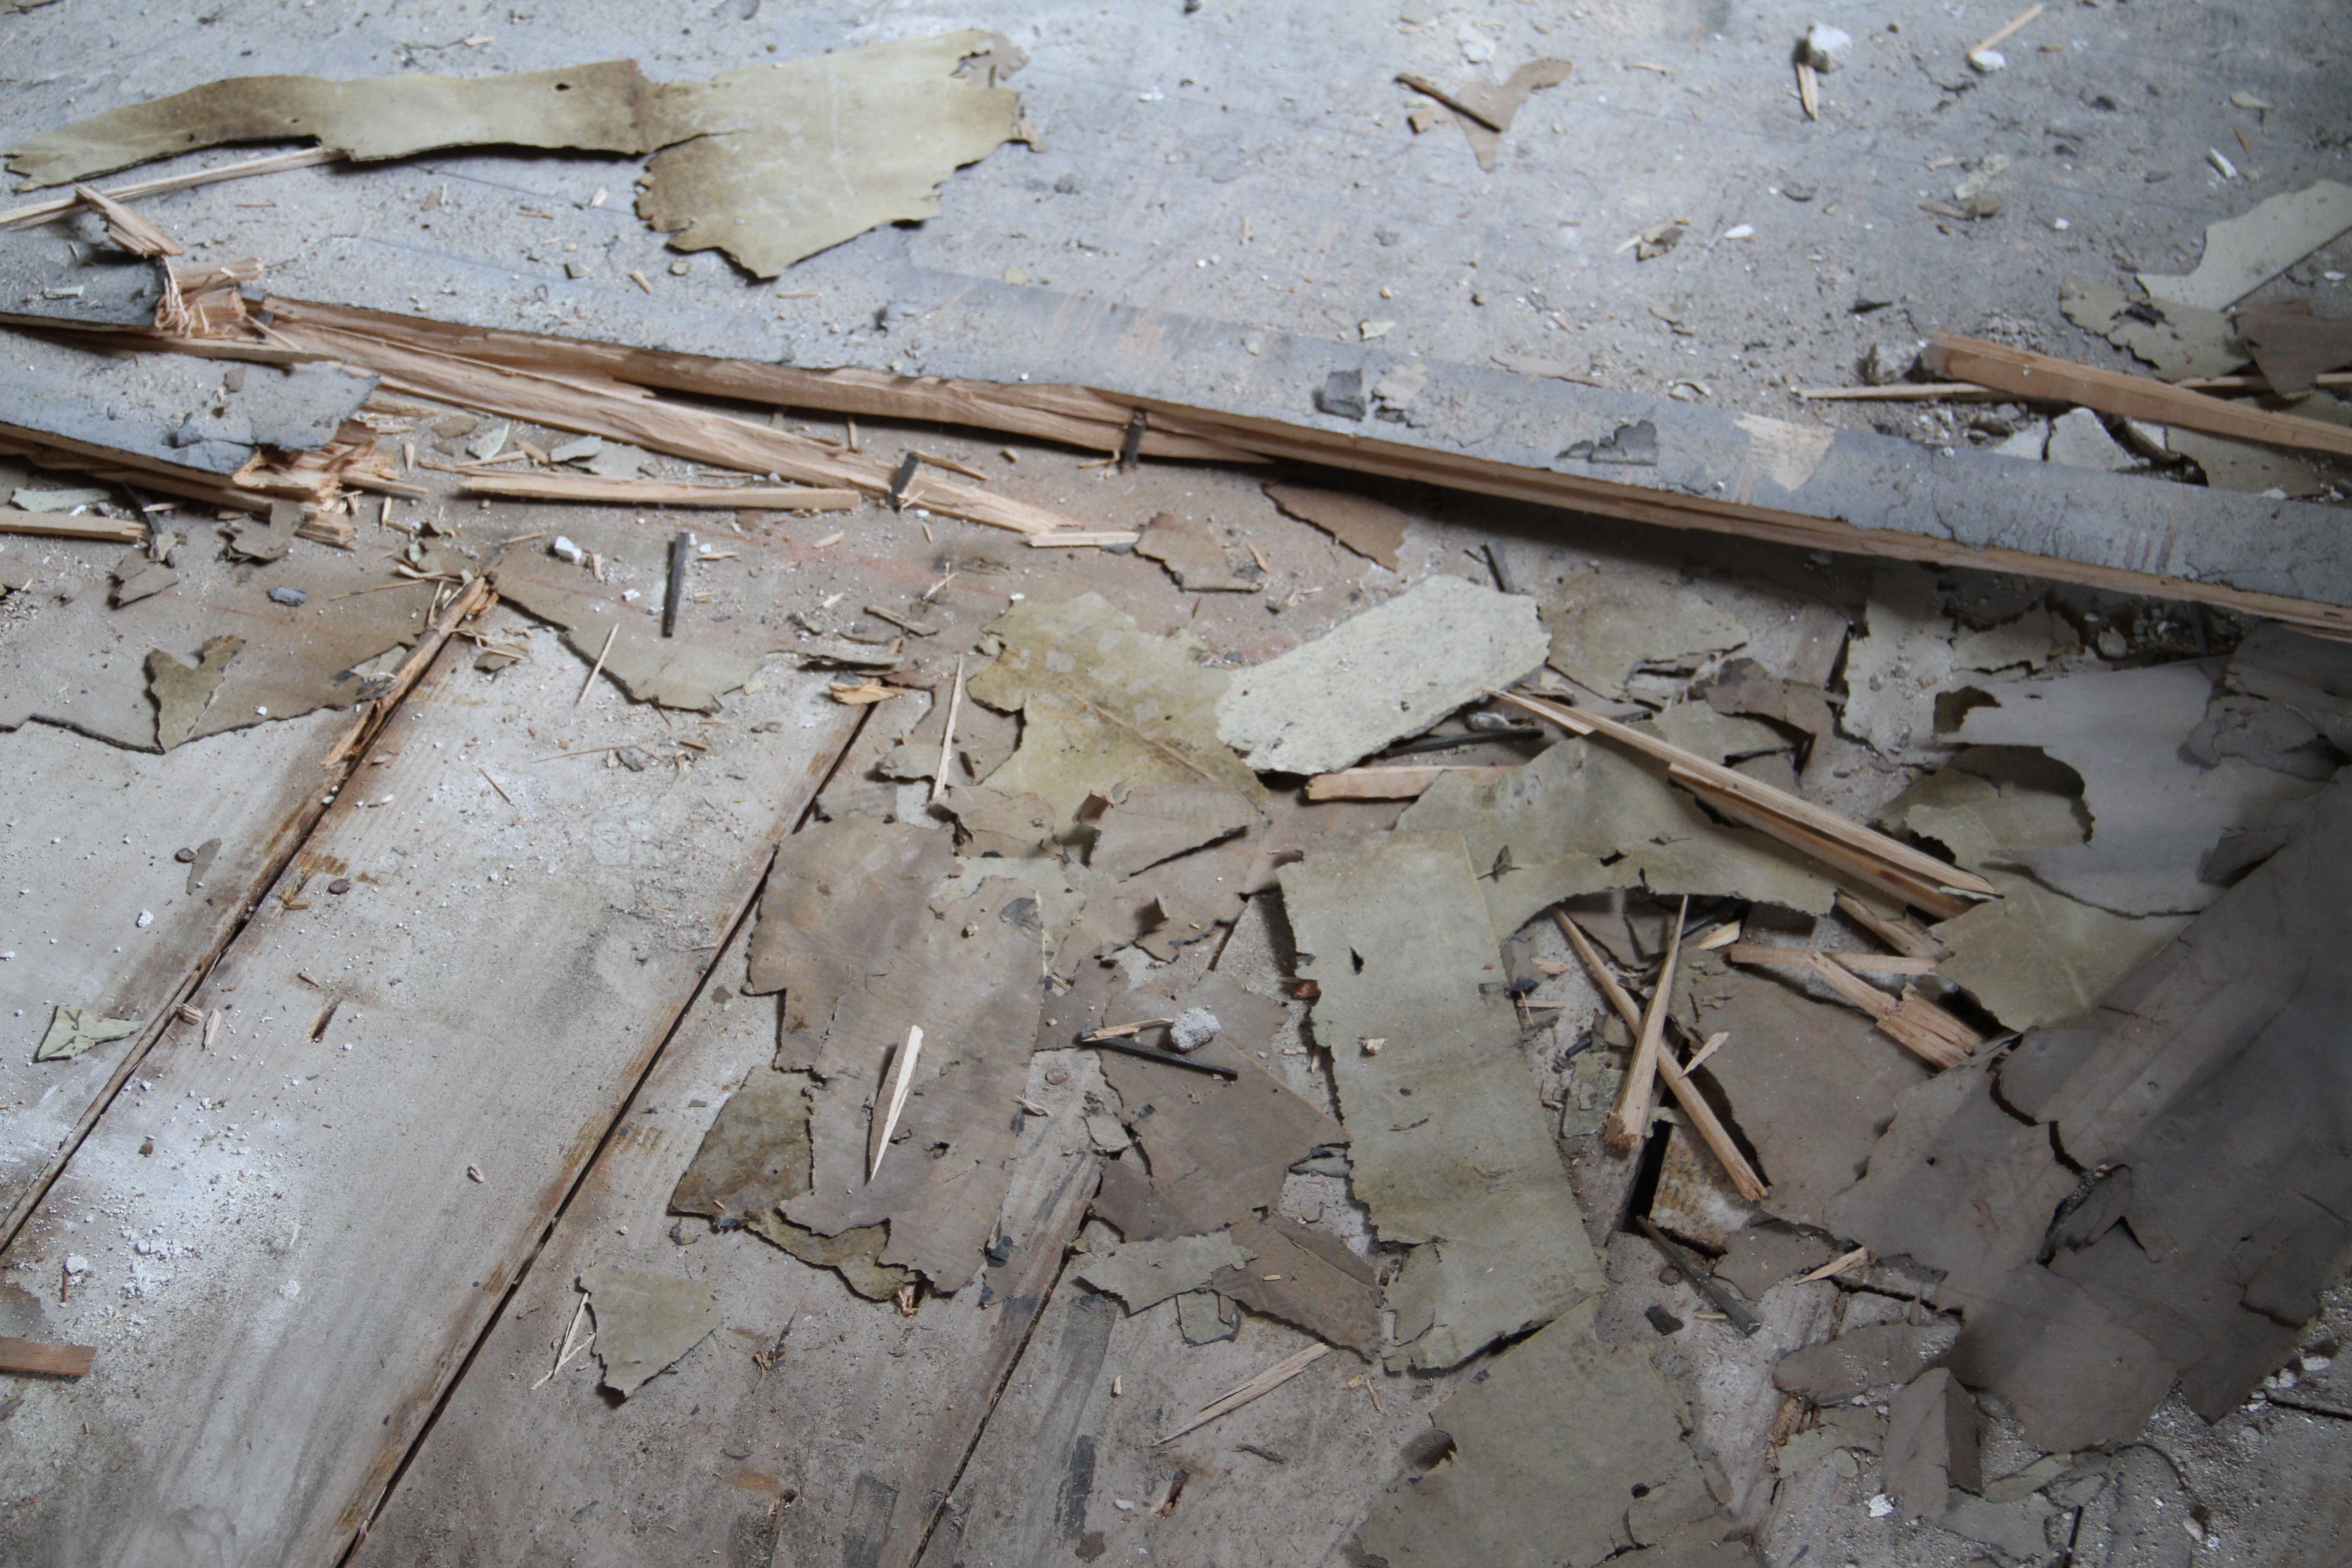 So up the flooring went. Paper debris, nails, splinters, dust - everything was flying around in there.